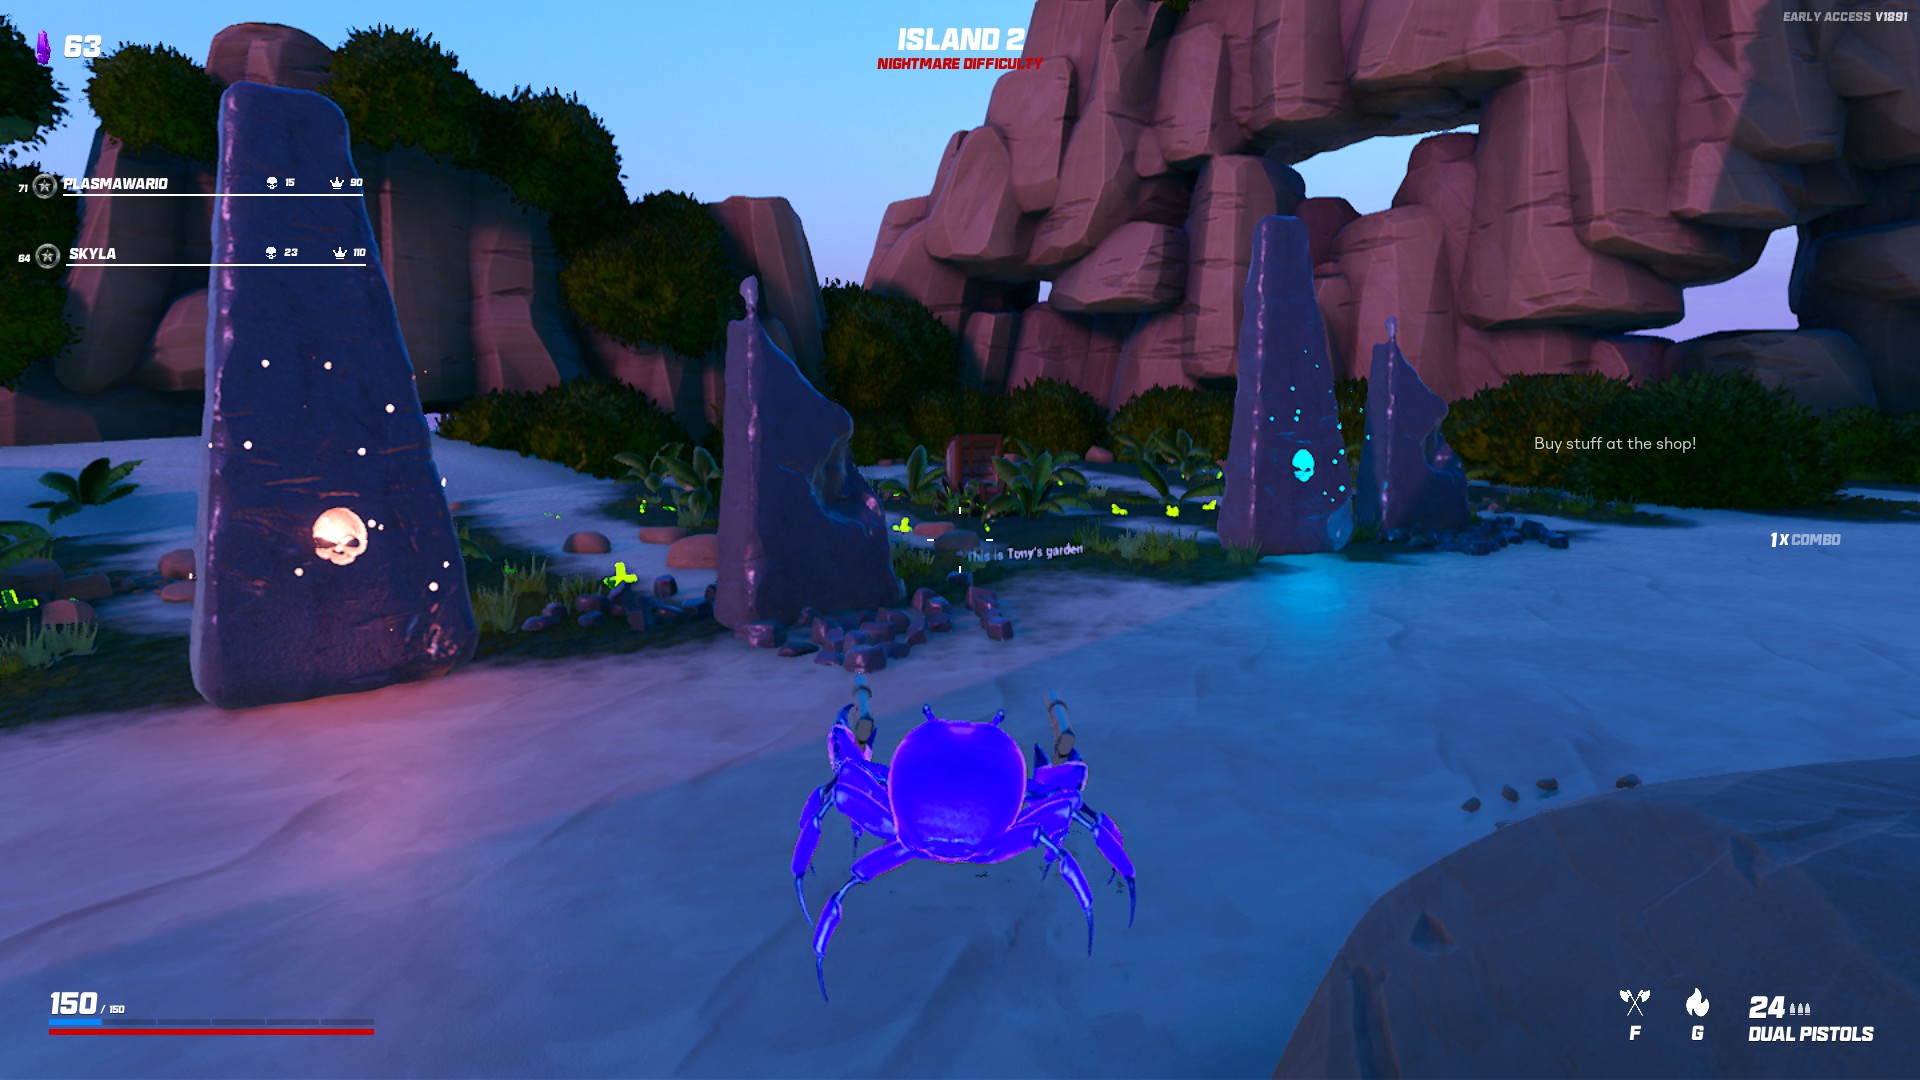 Getting to the secret island in Crab Champions @Crab Champions #crabch